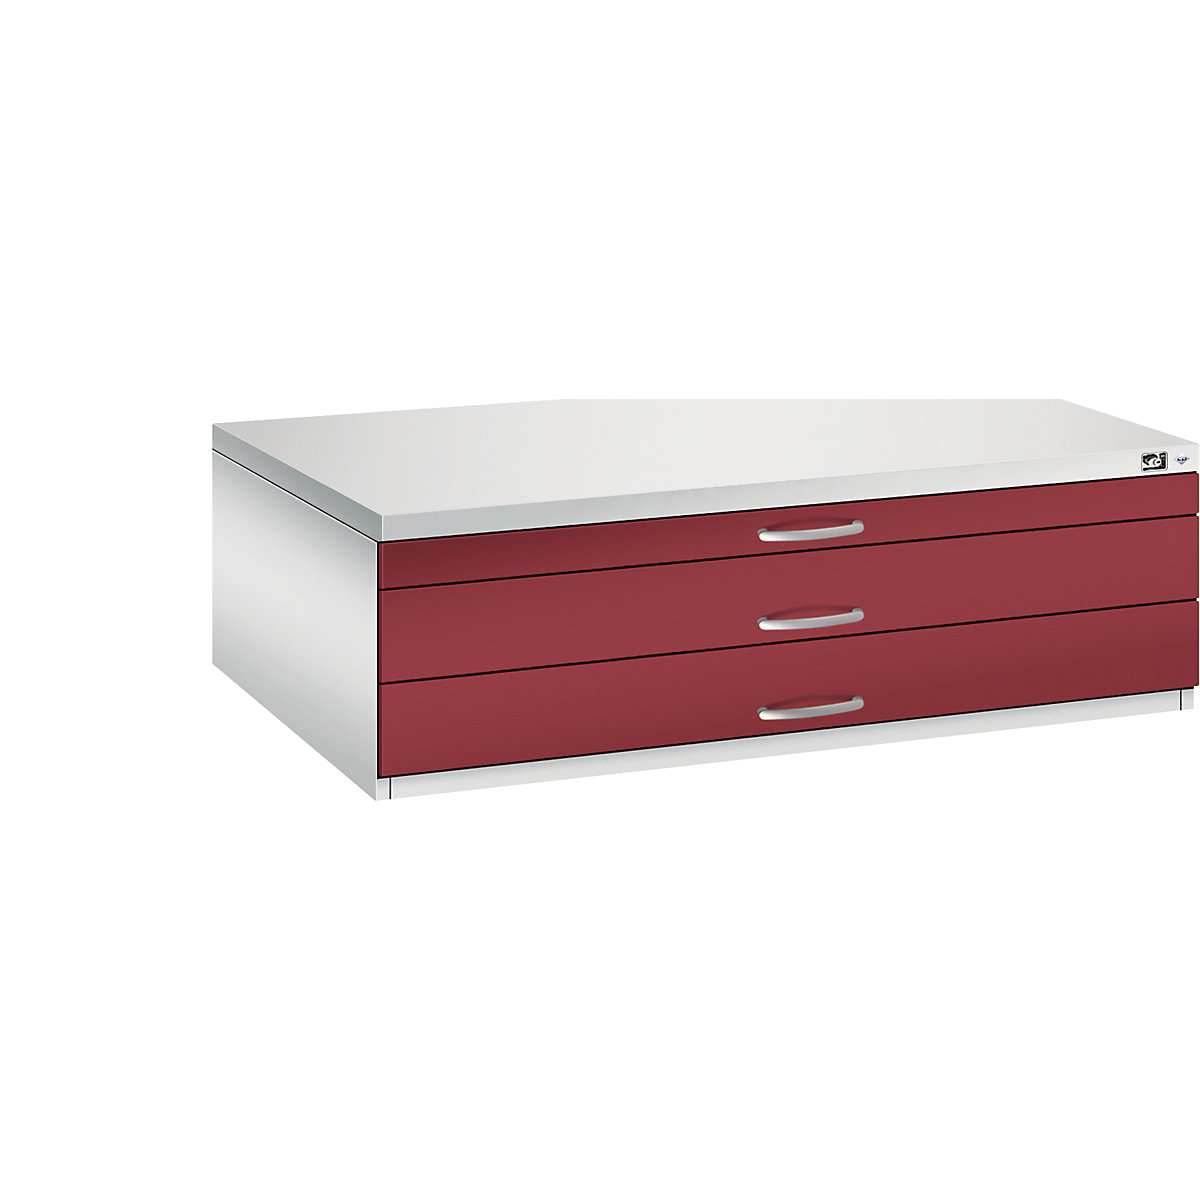 Drawing cabinet – C+P, A0, 3 drawers, height 420 mm, light grey / ruby red-23